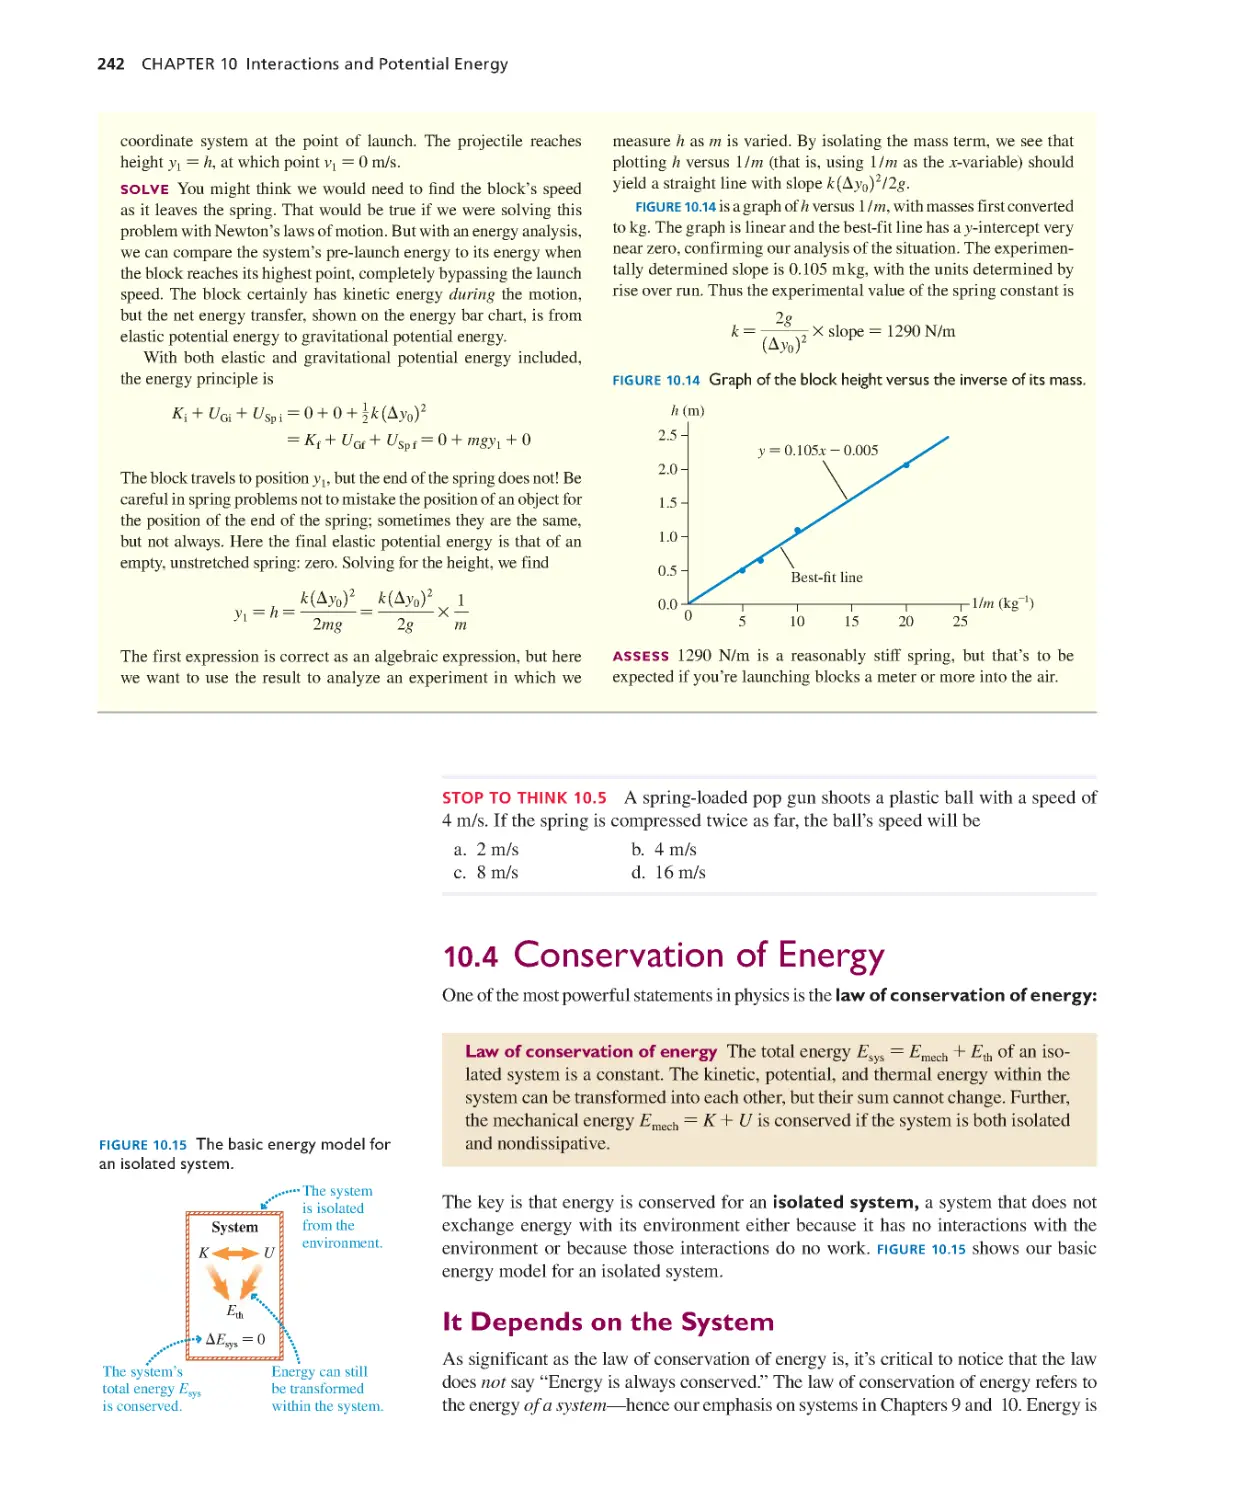 10.4. Conservation of Energy